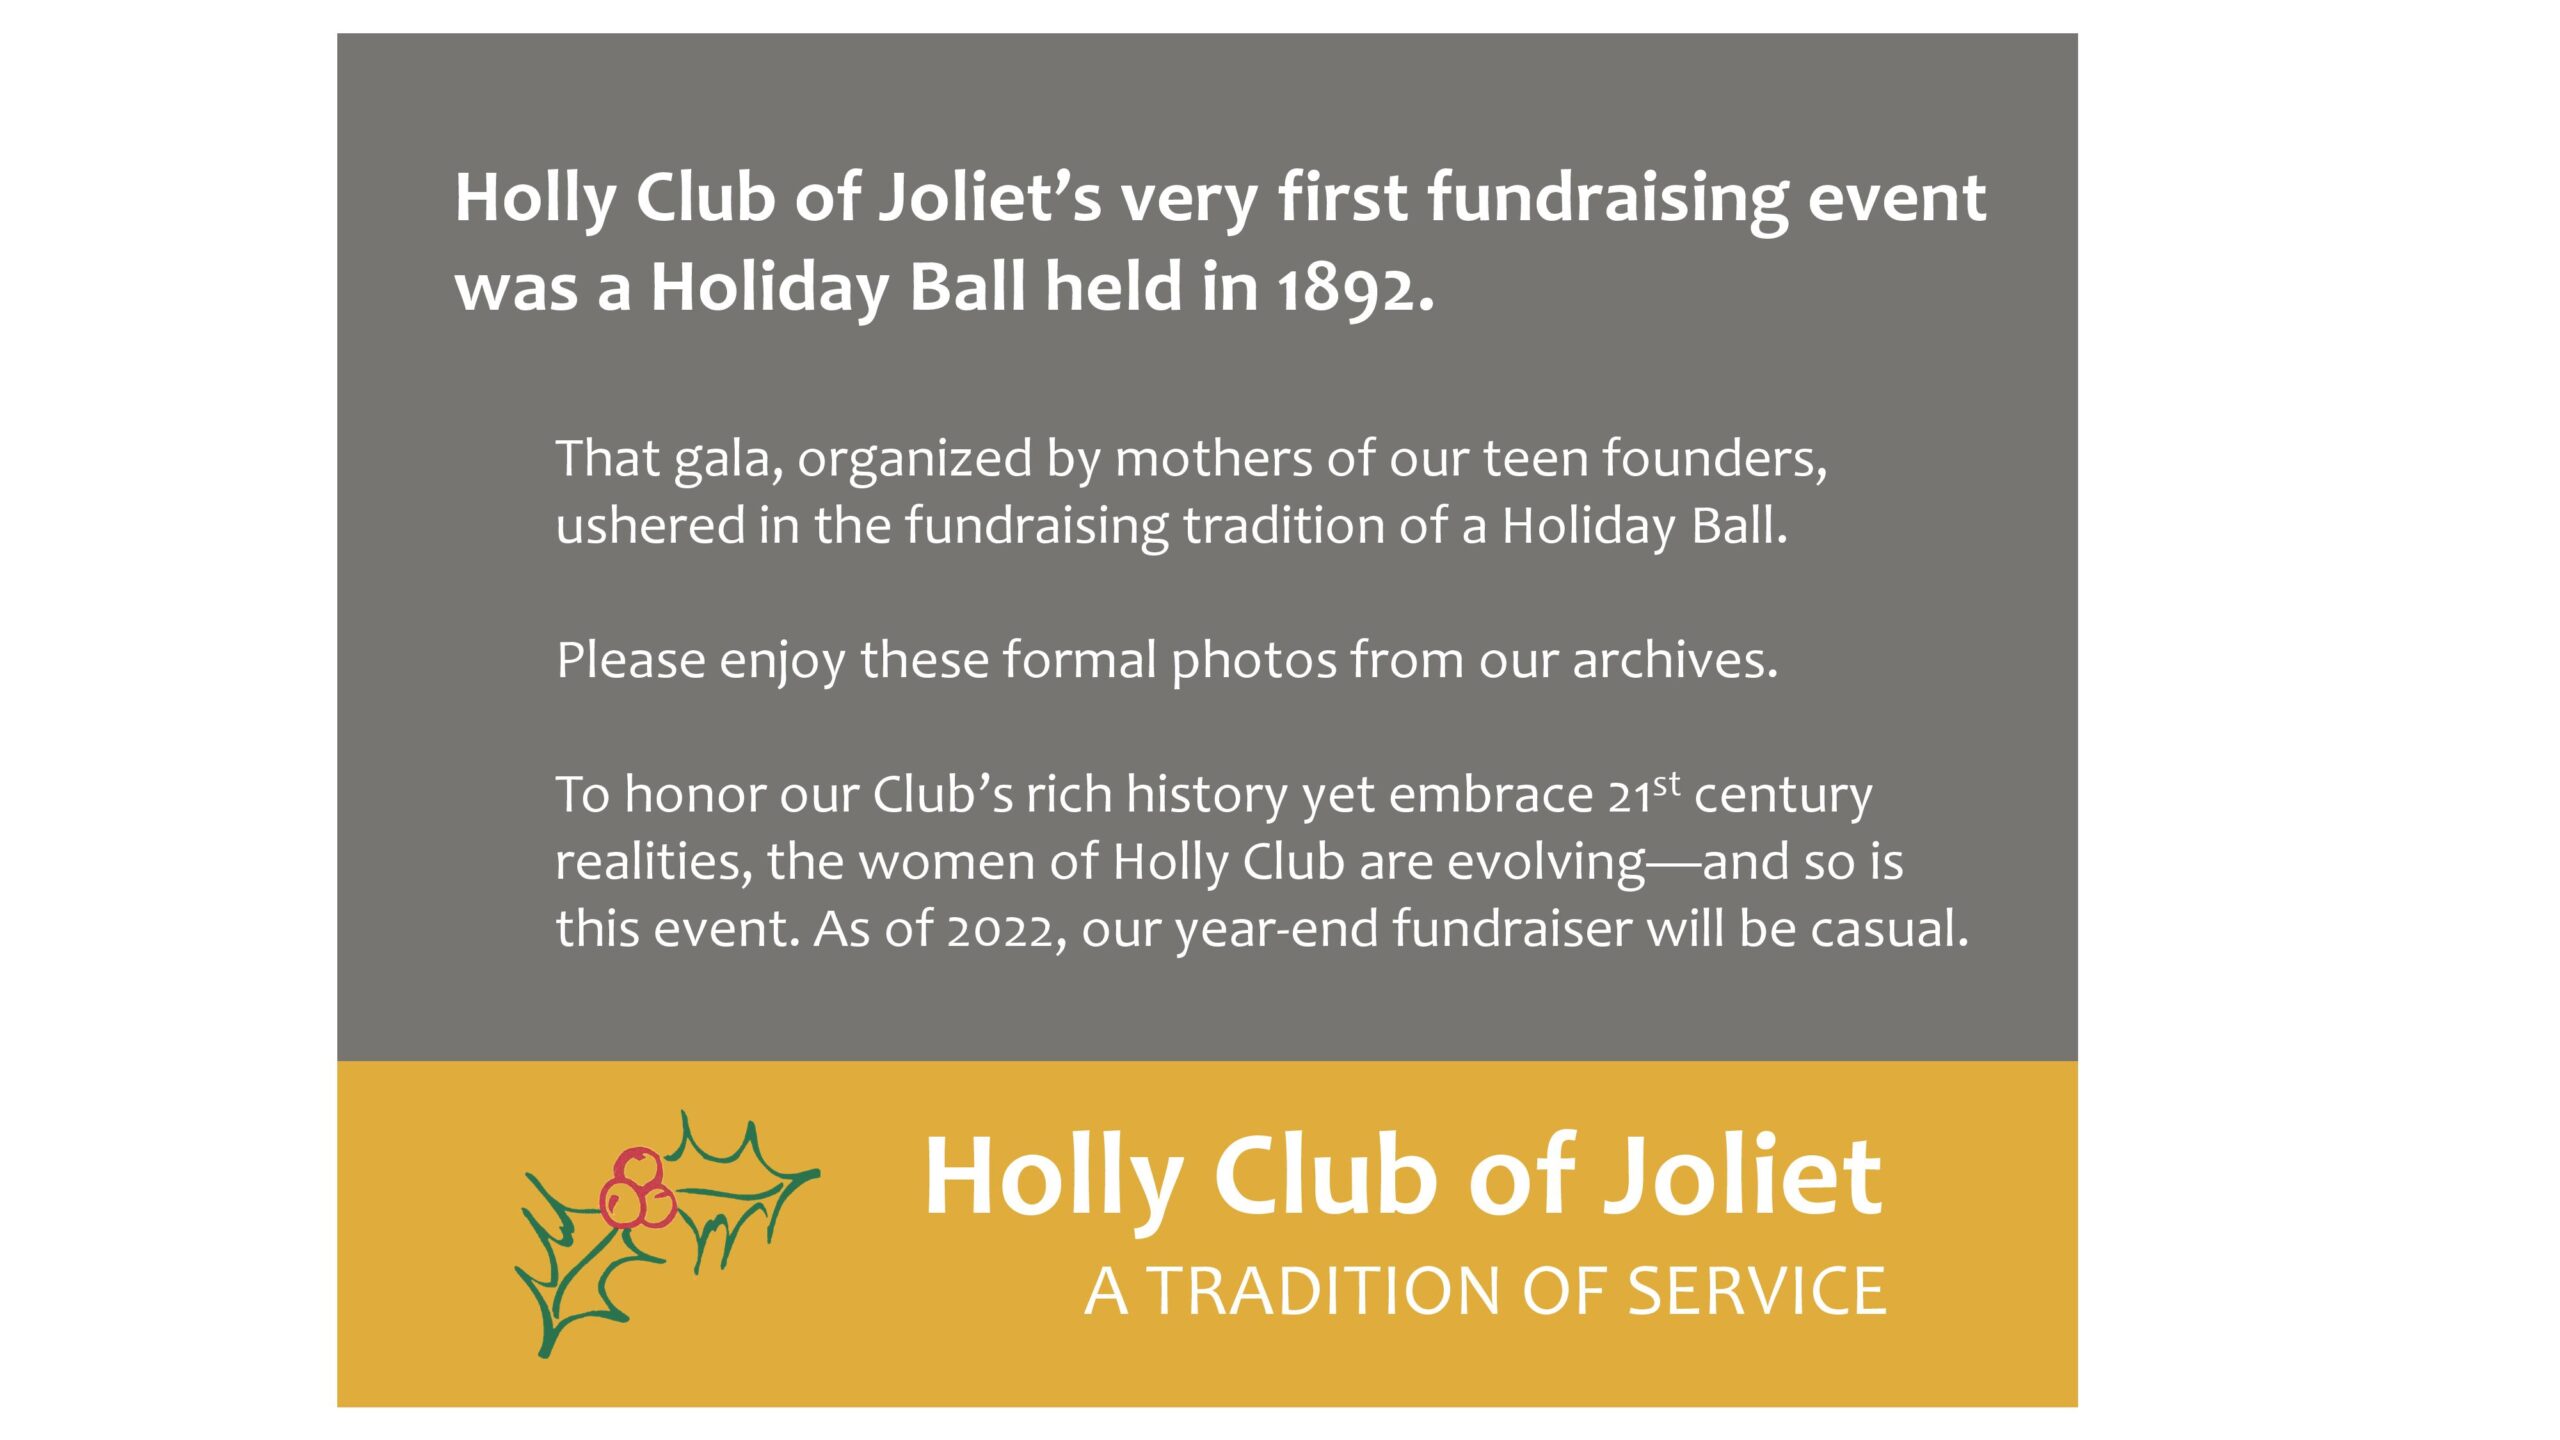 History of the Holly Club Ball